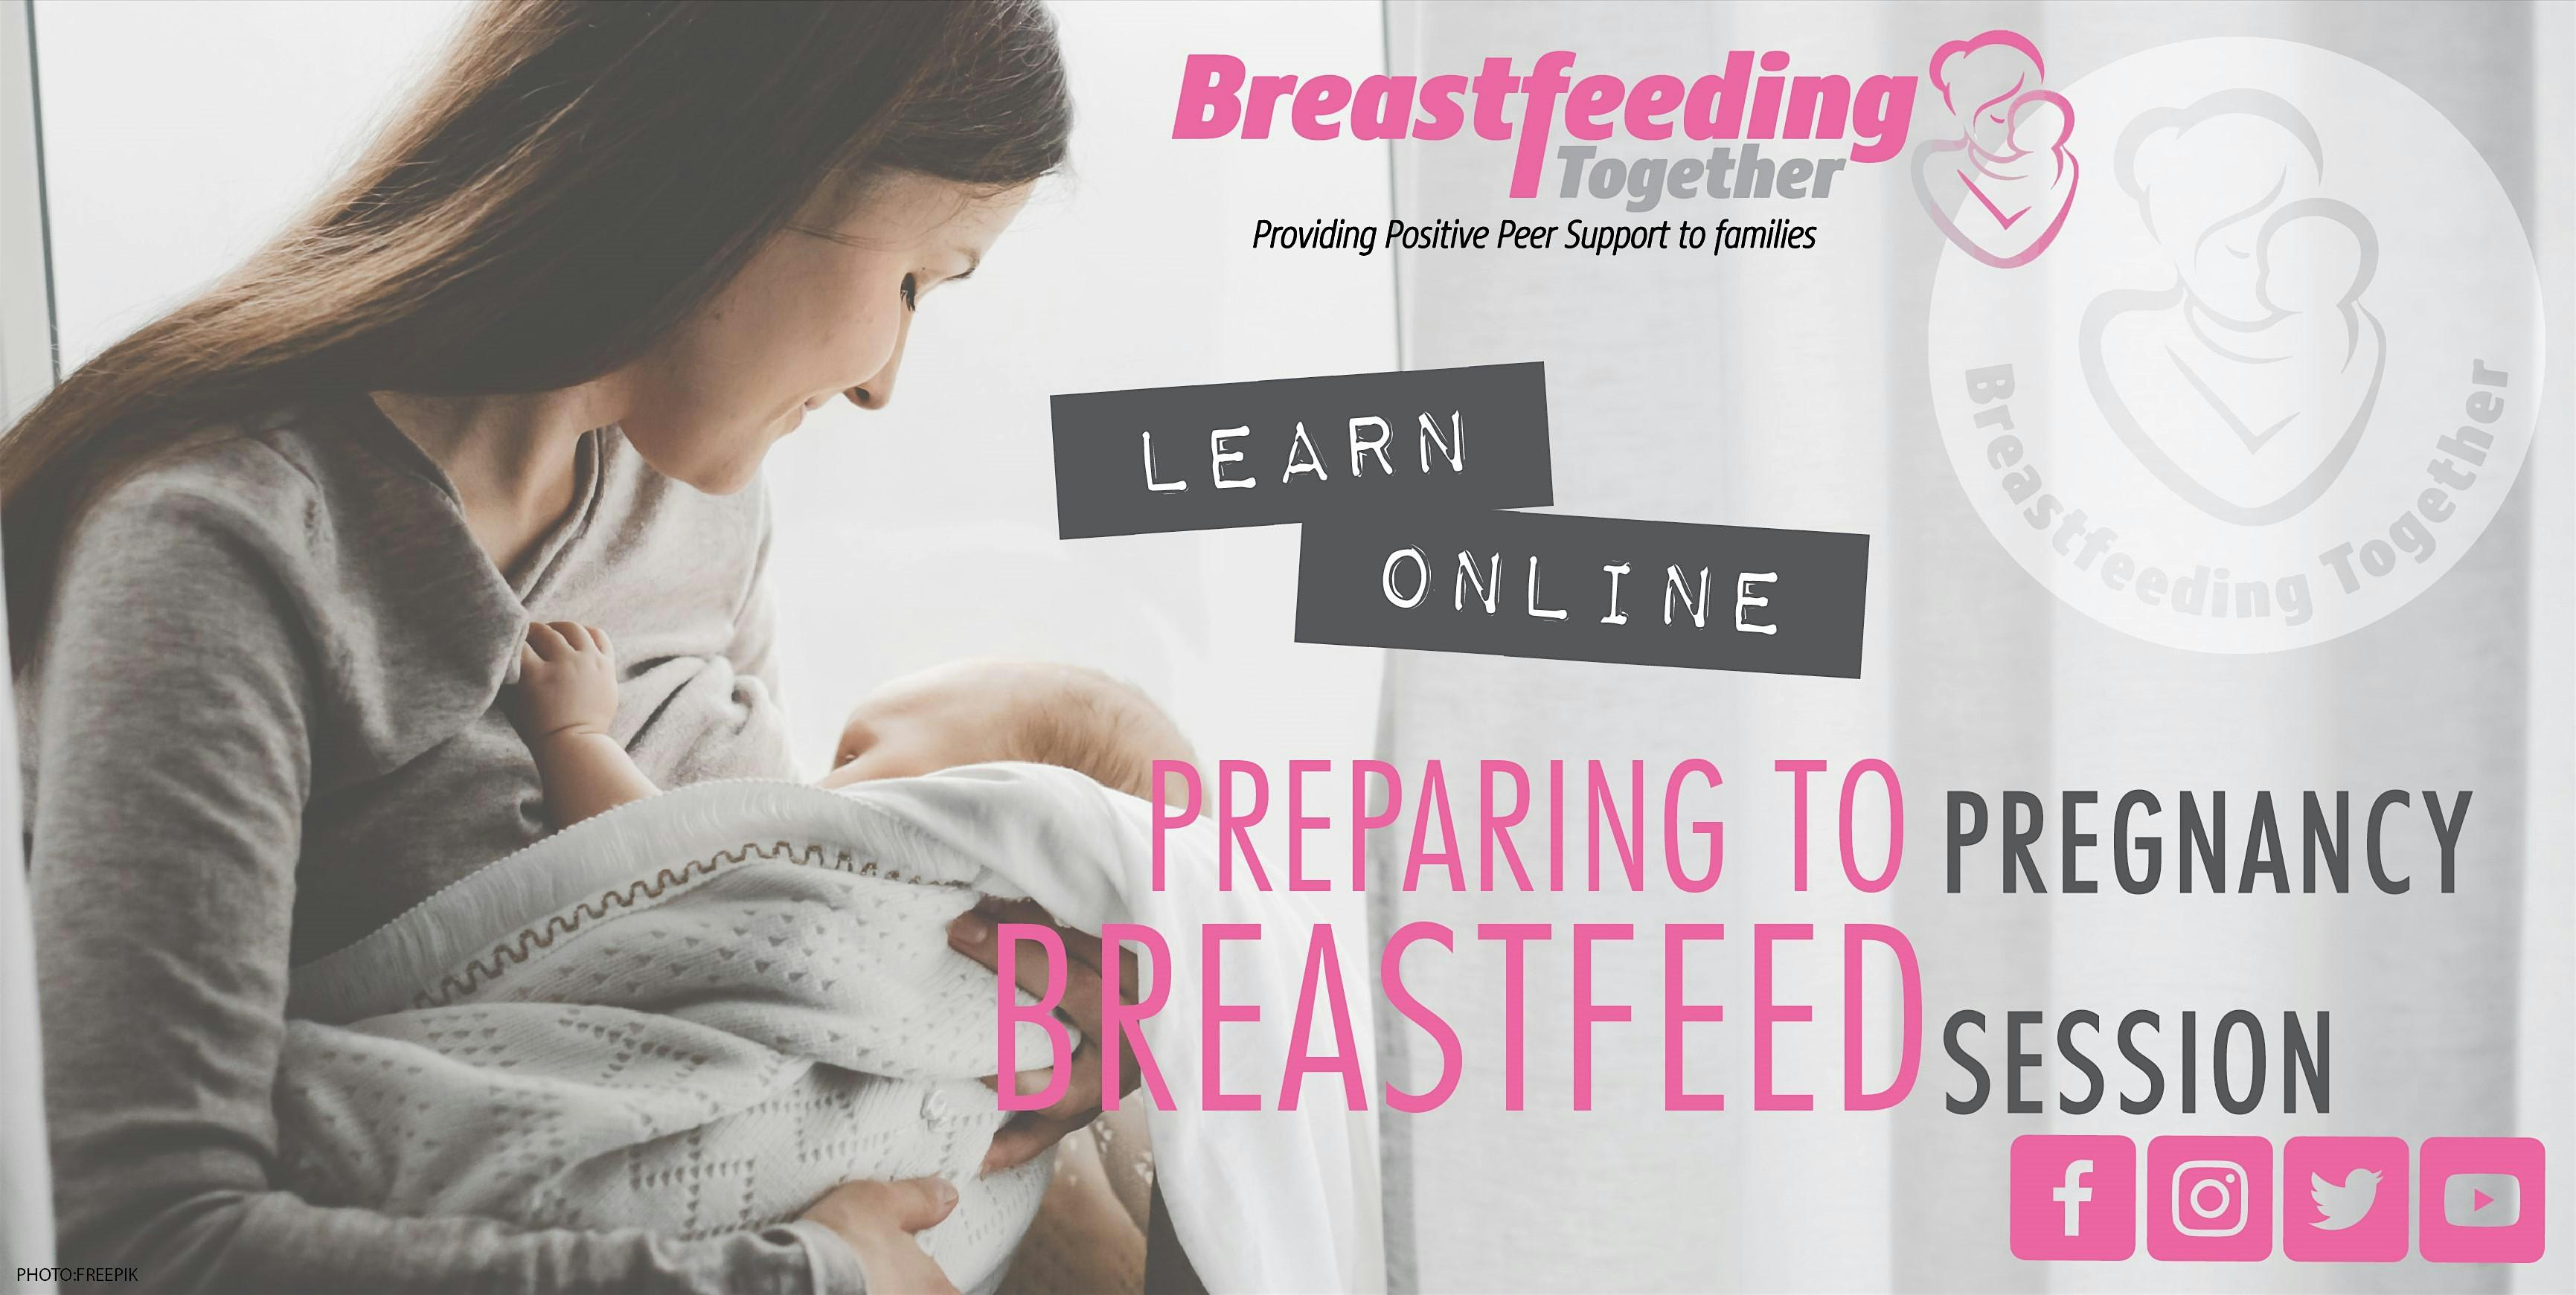 Preparing To Breastfeed - Online Session